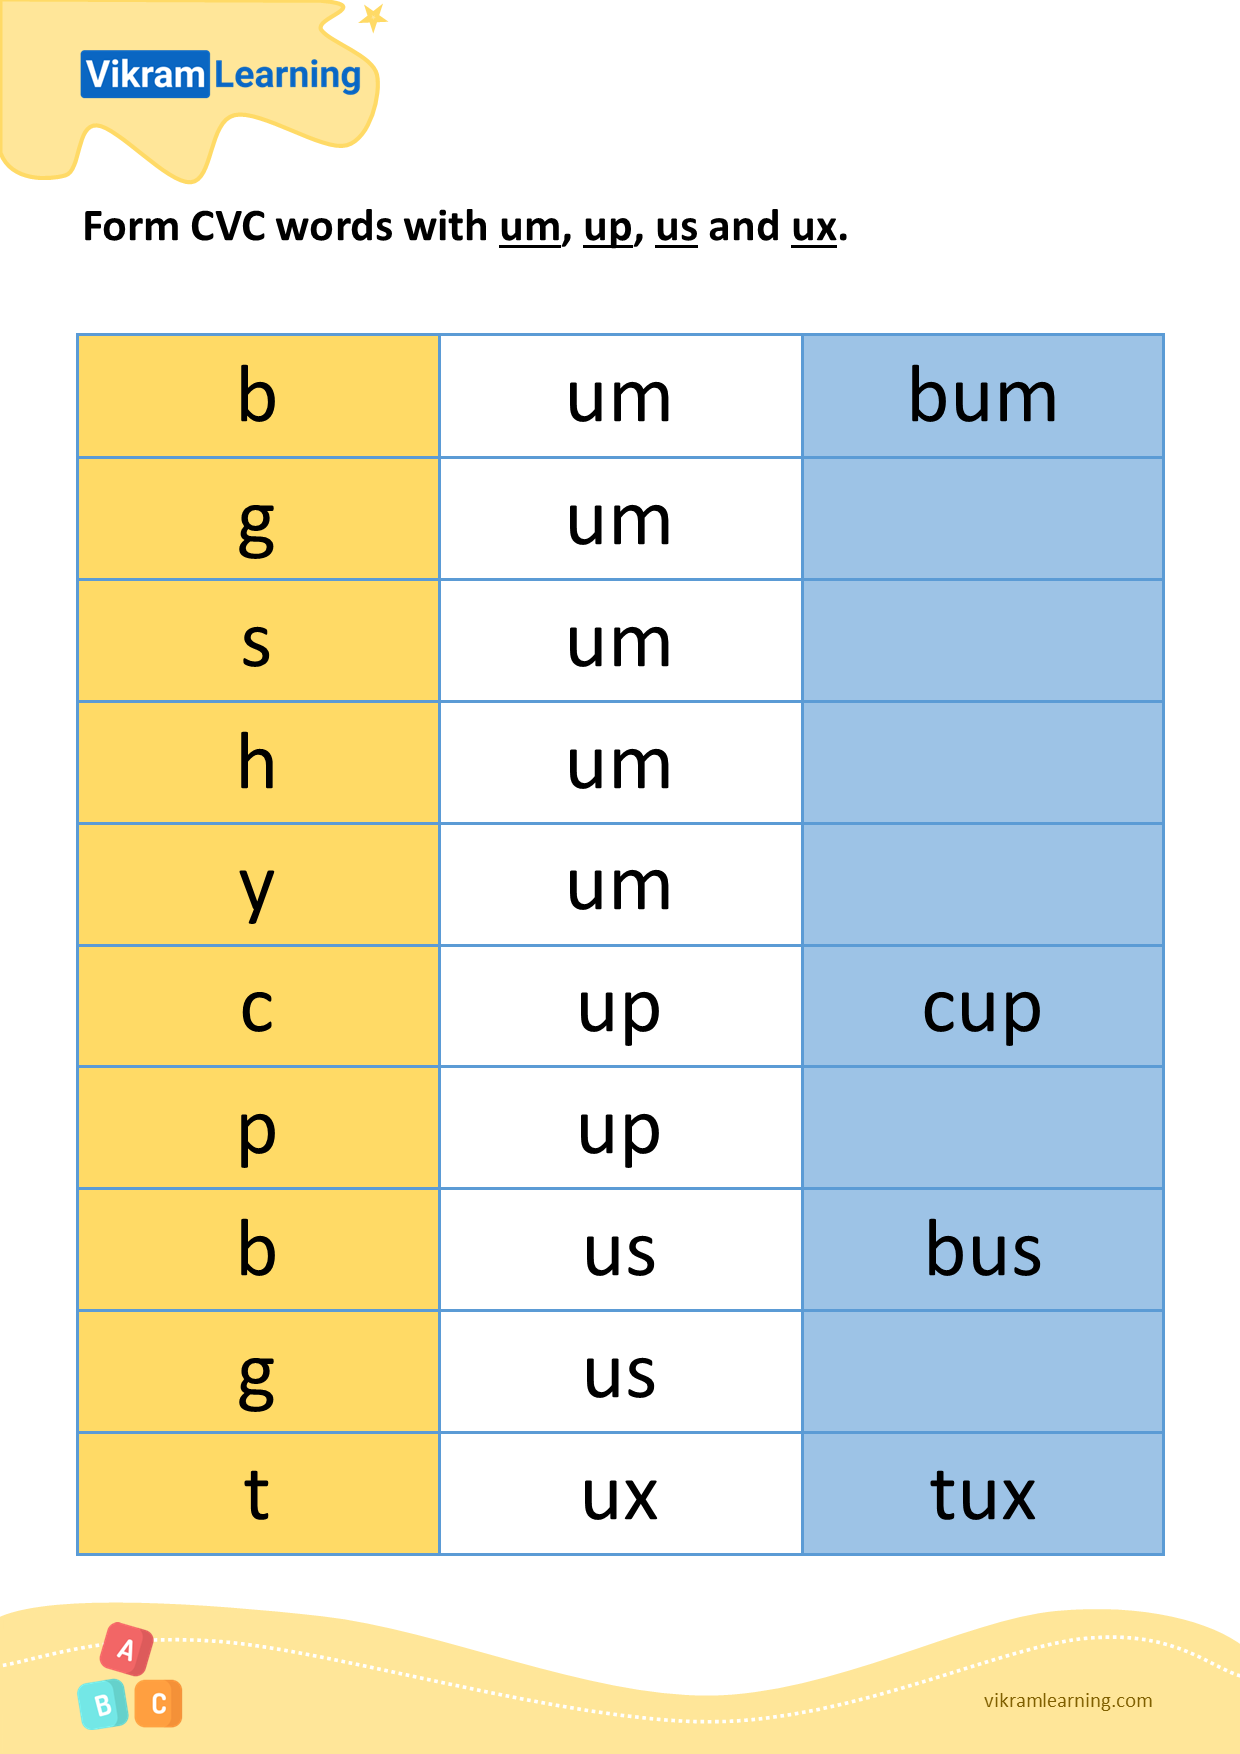 Download form cvc words with um, up, us, and ux worksheets